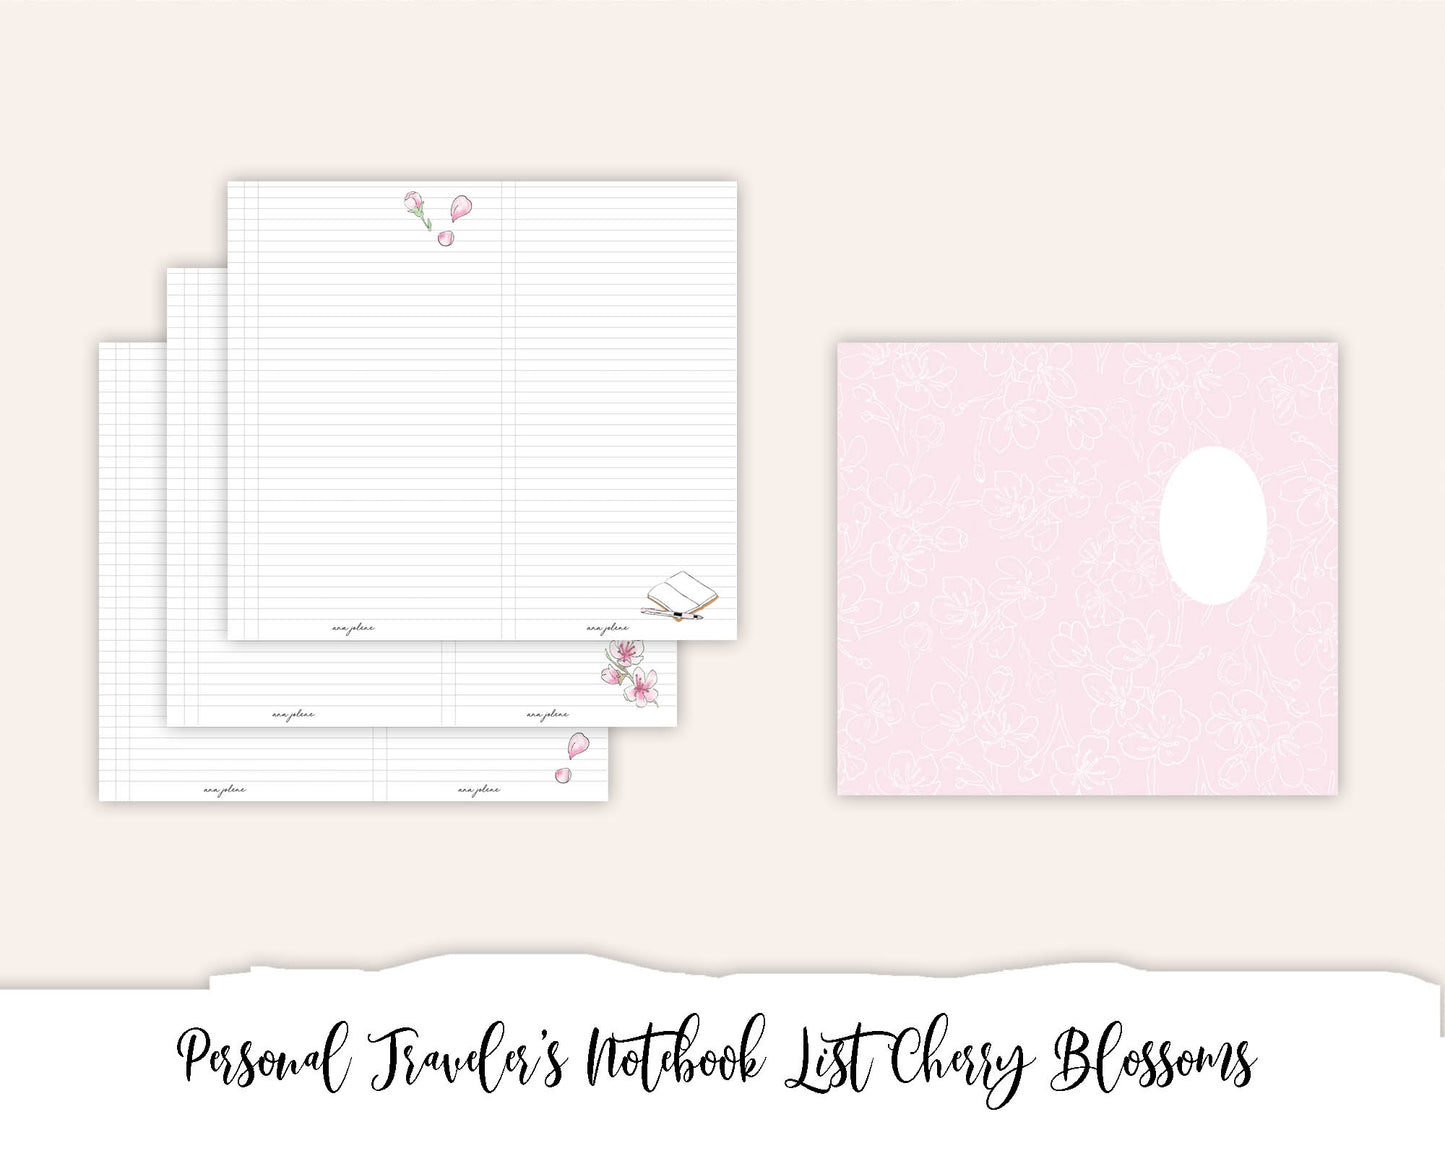 Personal Traveler's Notebook Printable - Lists Cherry Blossom